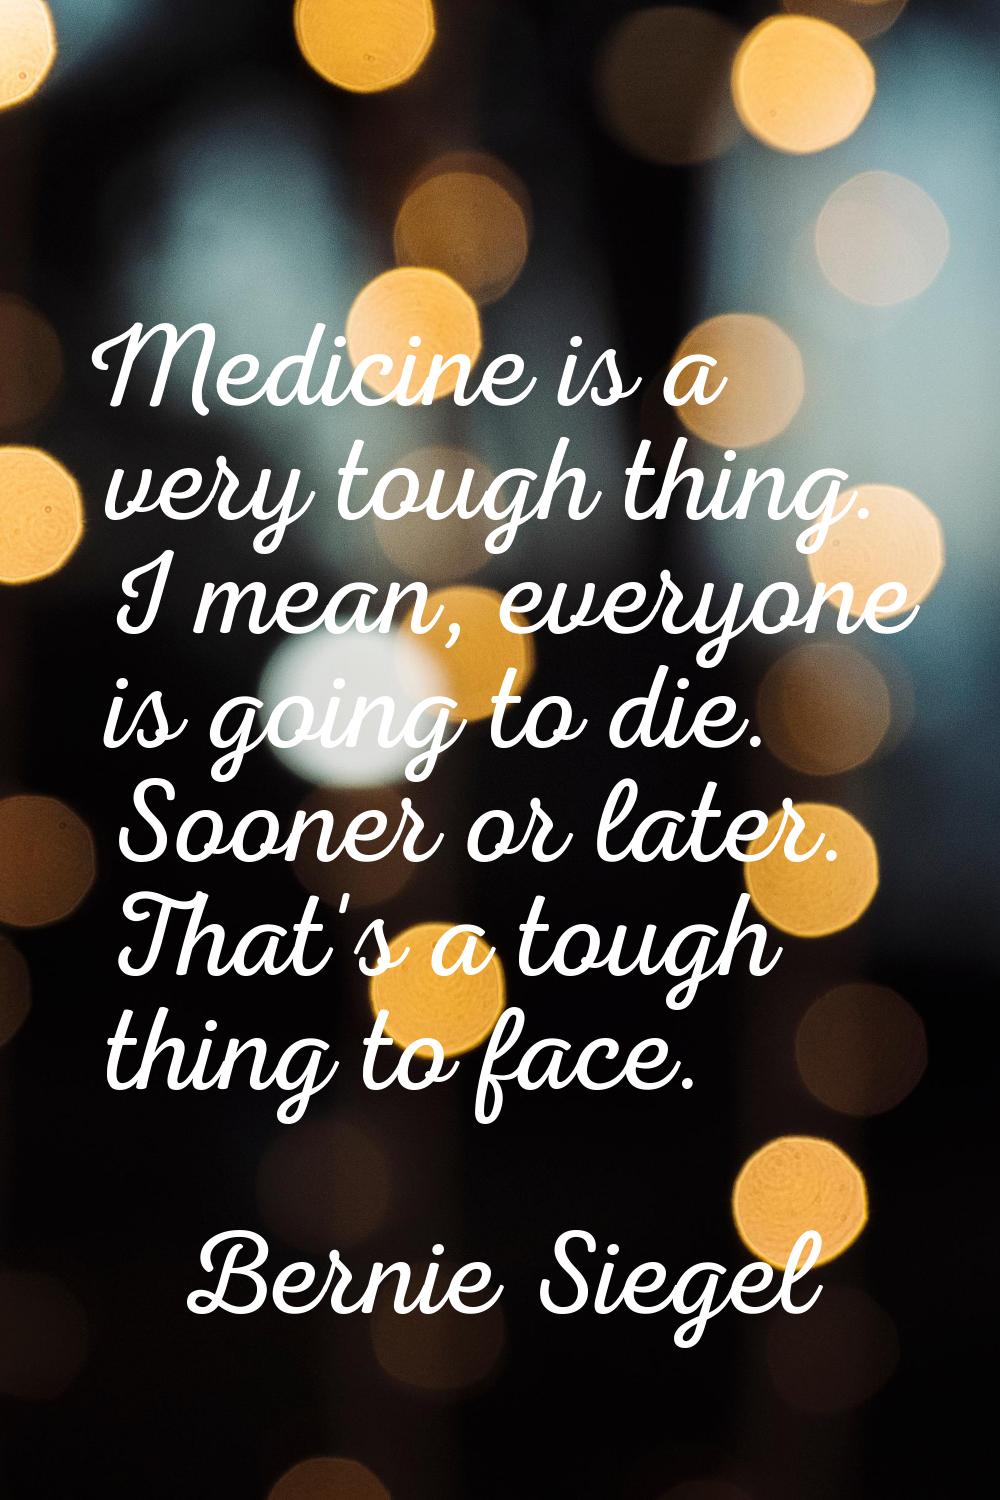 Medicine is a very tough thing. I mean, everyone is going to die. Sooner or later. That's a tough t